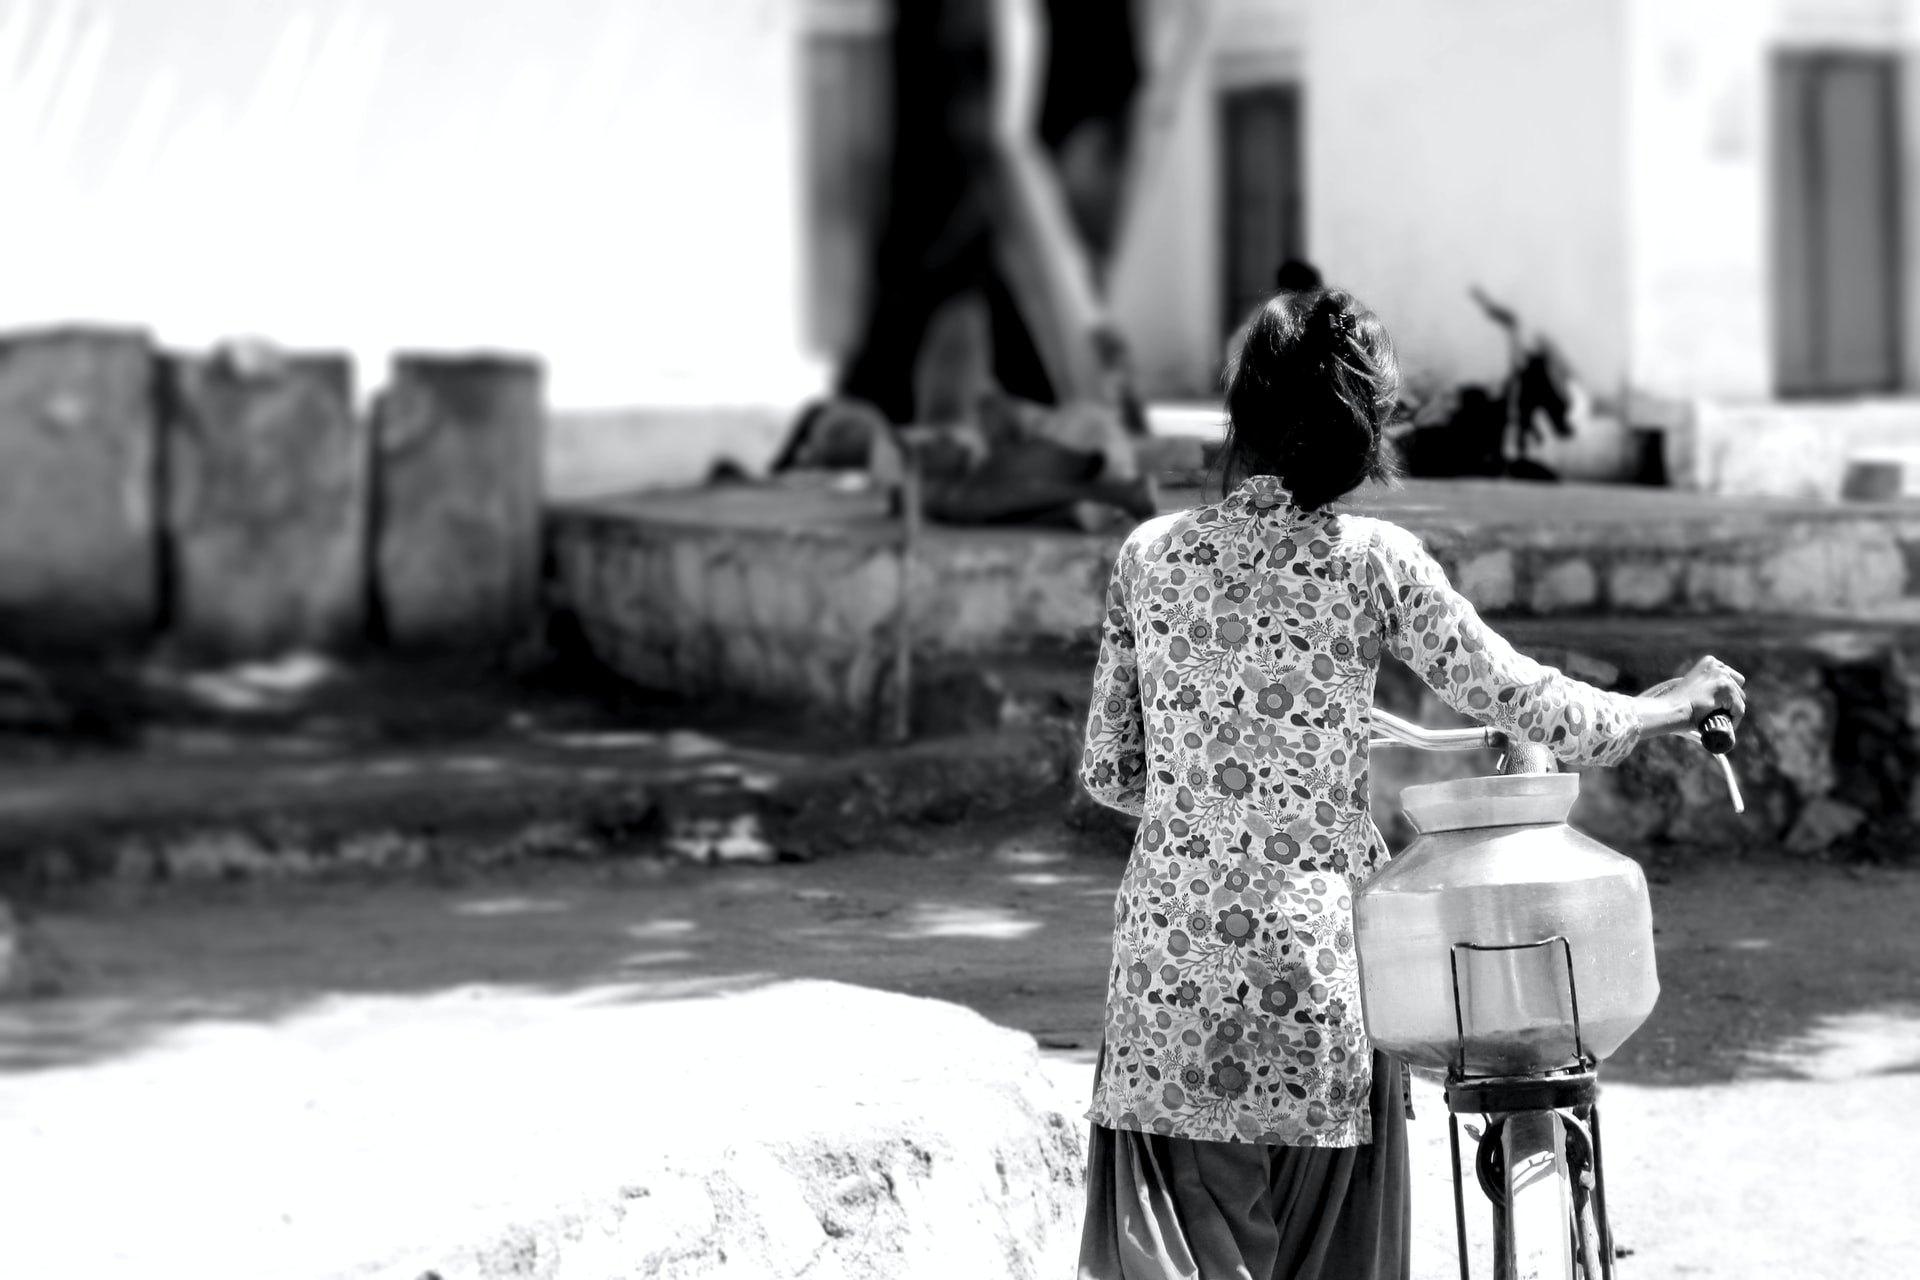 woman carrying water